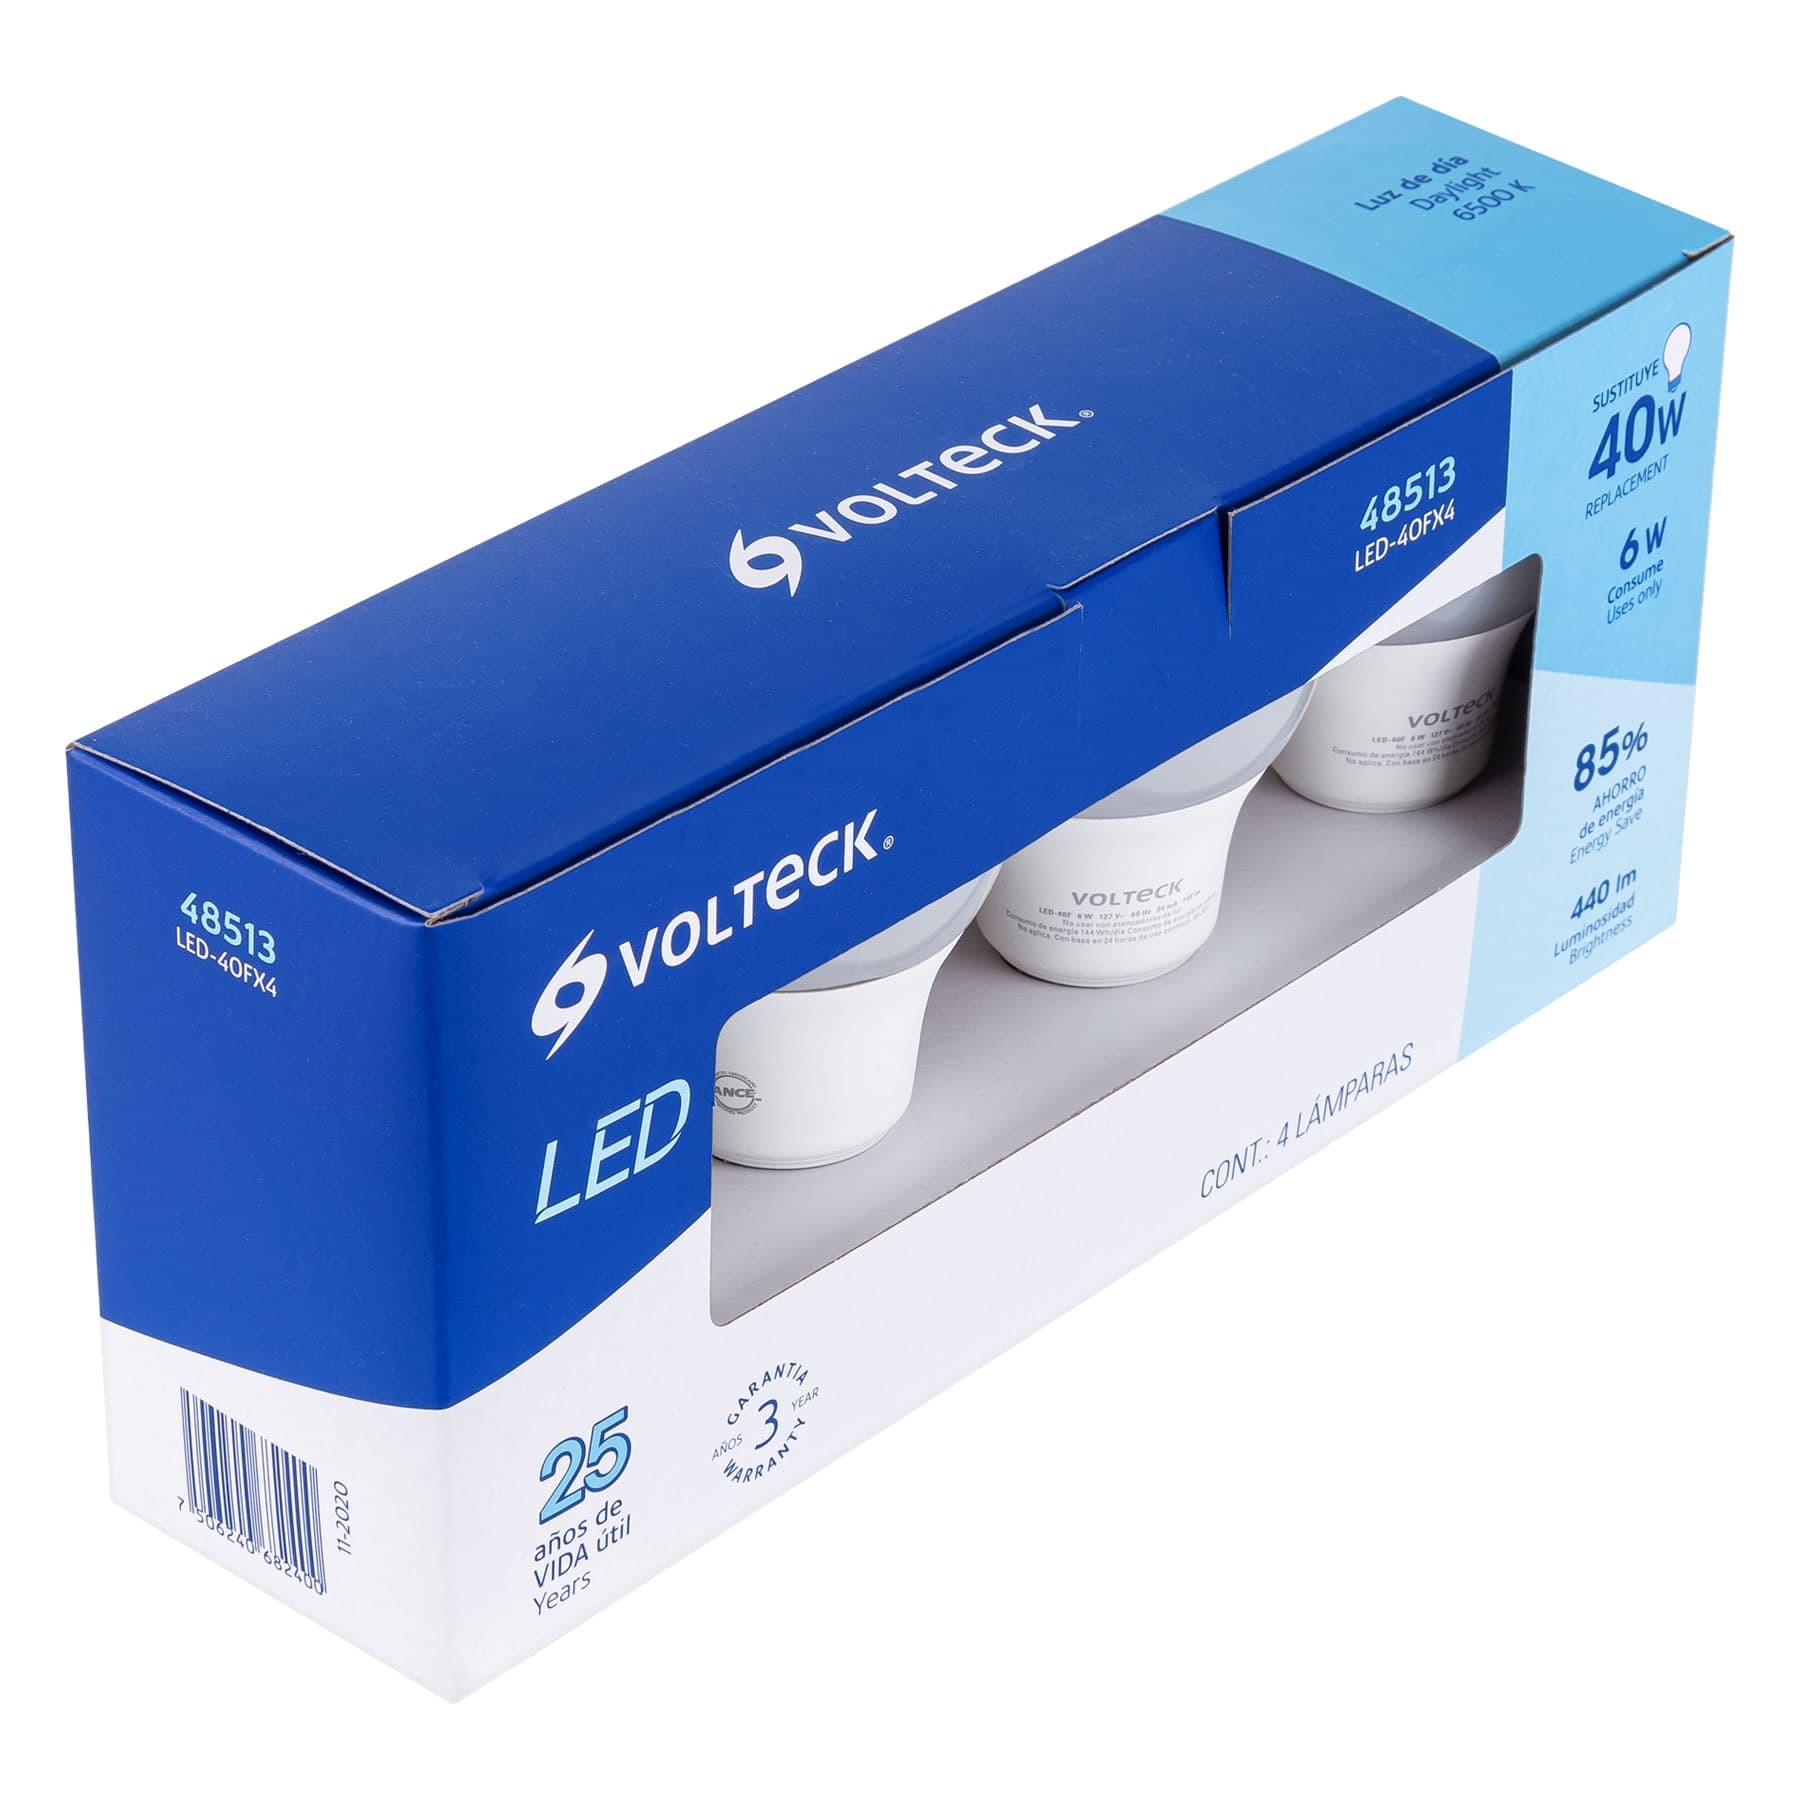 Volteck Pack of 4 LED Lamps G45 3 W Daylight Box.